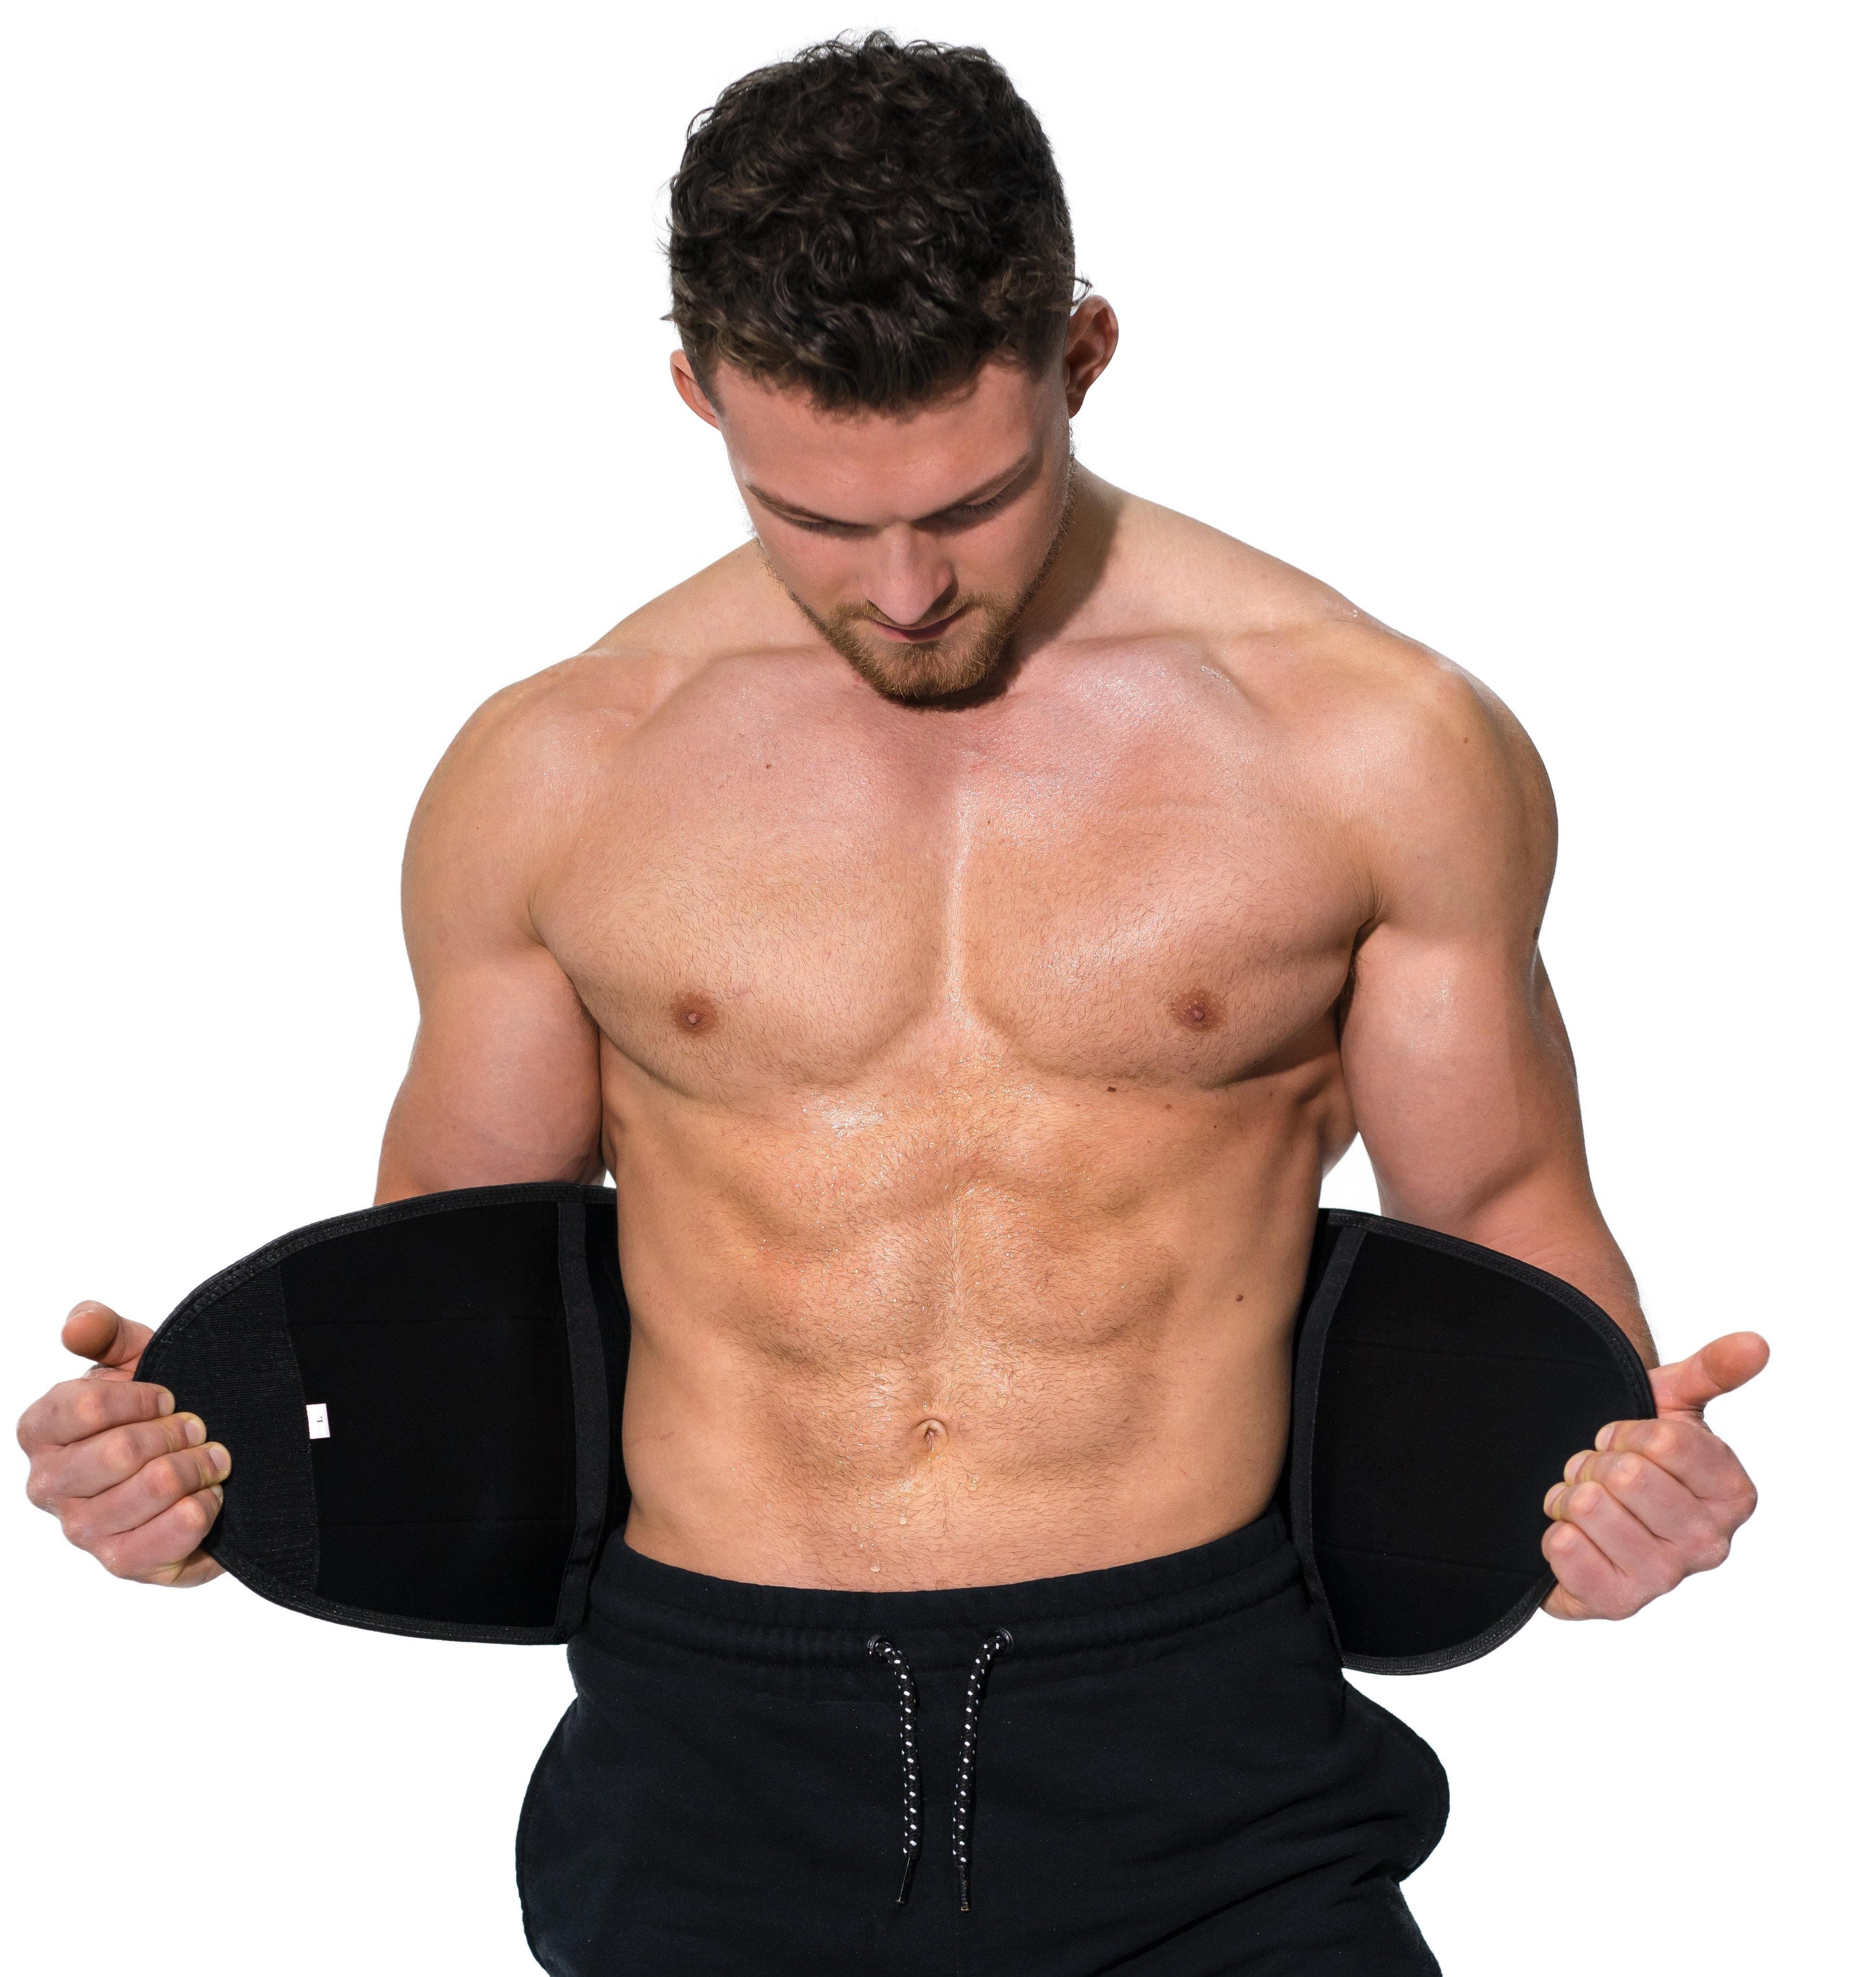 Man modeling the Redge Fit Core Focus Sweat Belt Available at https://www.getredge.com/products/core-focus-all-in-one-pack